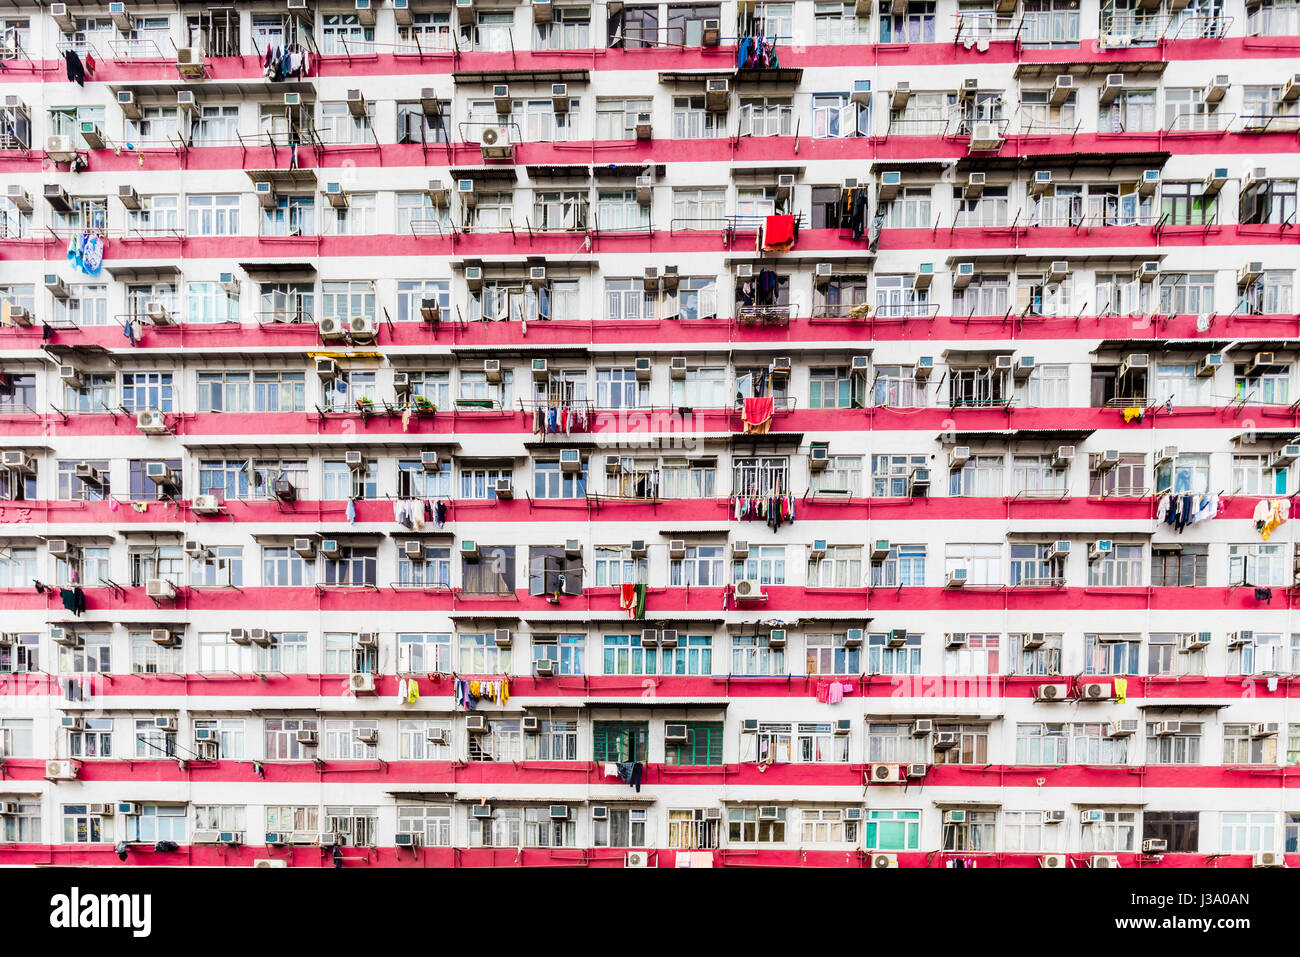 Traditional style apartments in Hong Kong, residents live in cramped conditions. Mong Kok is situated on Kowloon side. Stock Photo